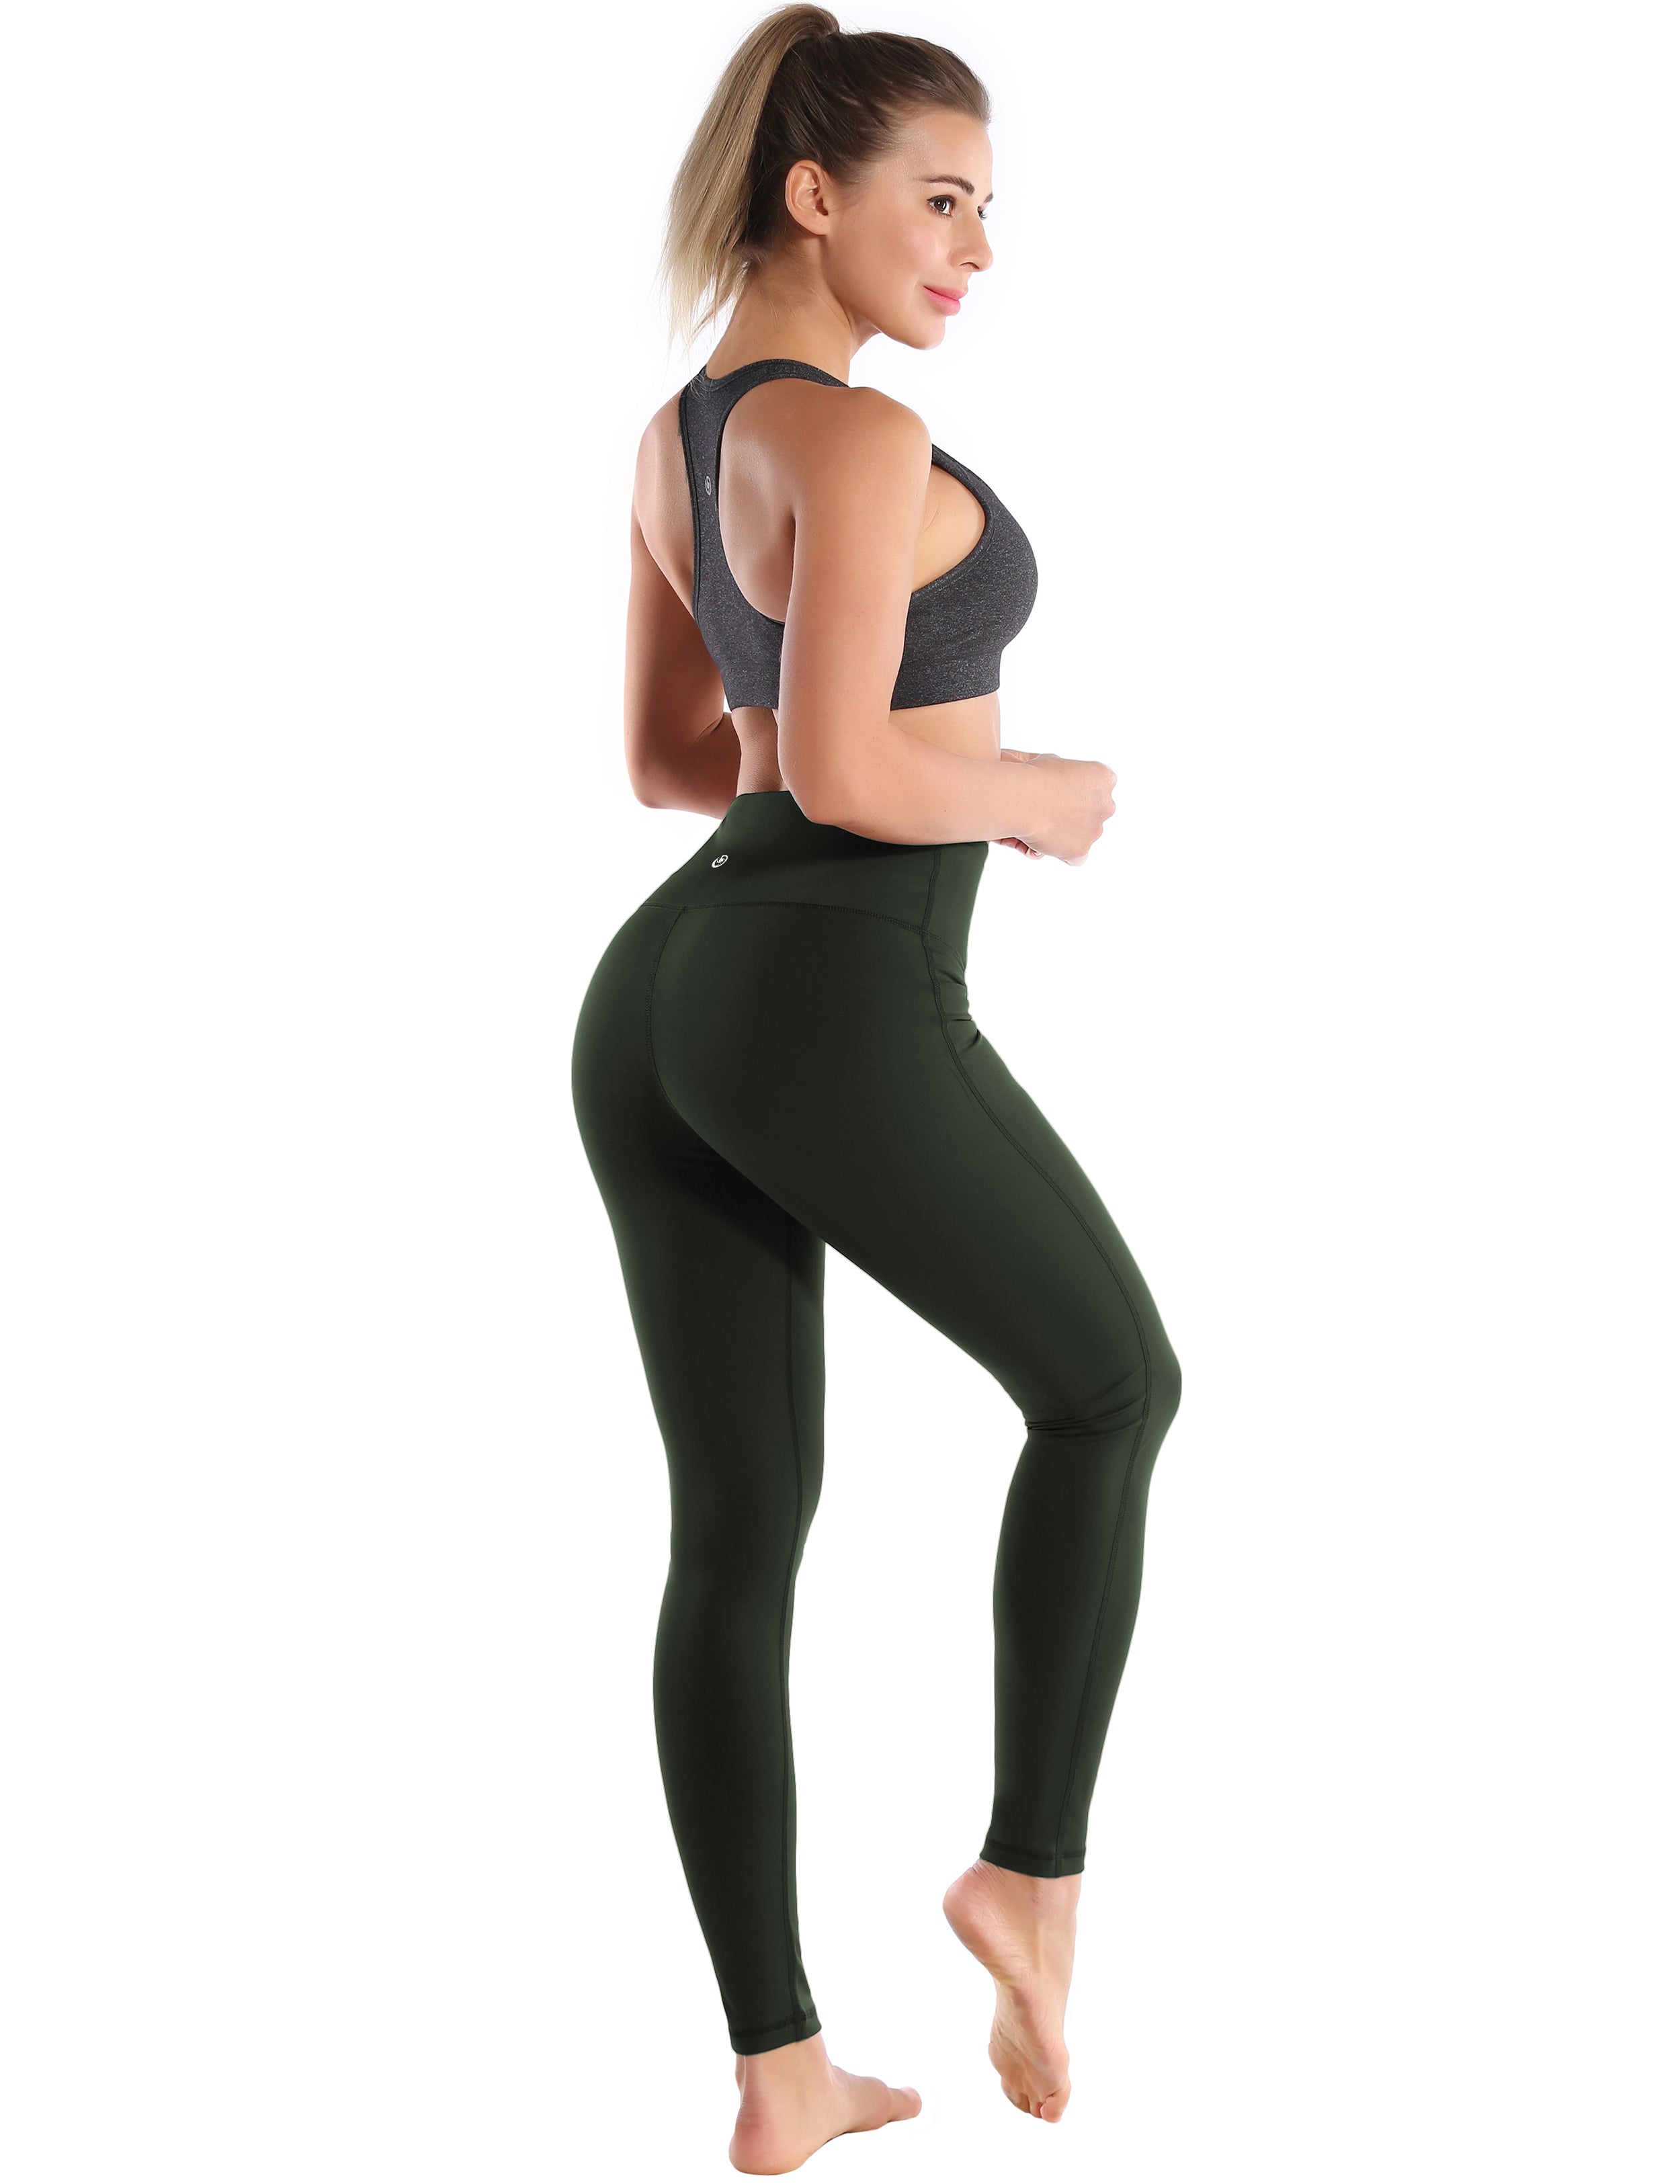 High Waist Side Line Yoga Pants olivegray Side Line is Make Your Legs Look Longer and Thinner 75%Nylon/25%Spandex Fabric doesn't attract lint easily 4-way stretch No see-through Moisture-wicking Tummy control Inner pocket Two lengths